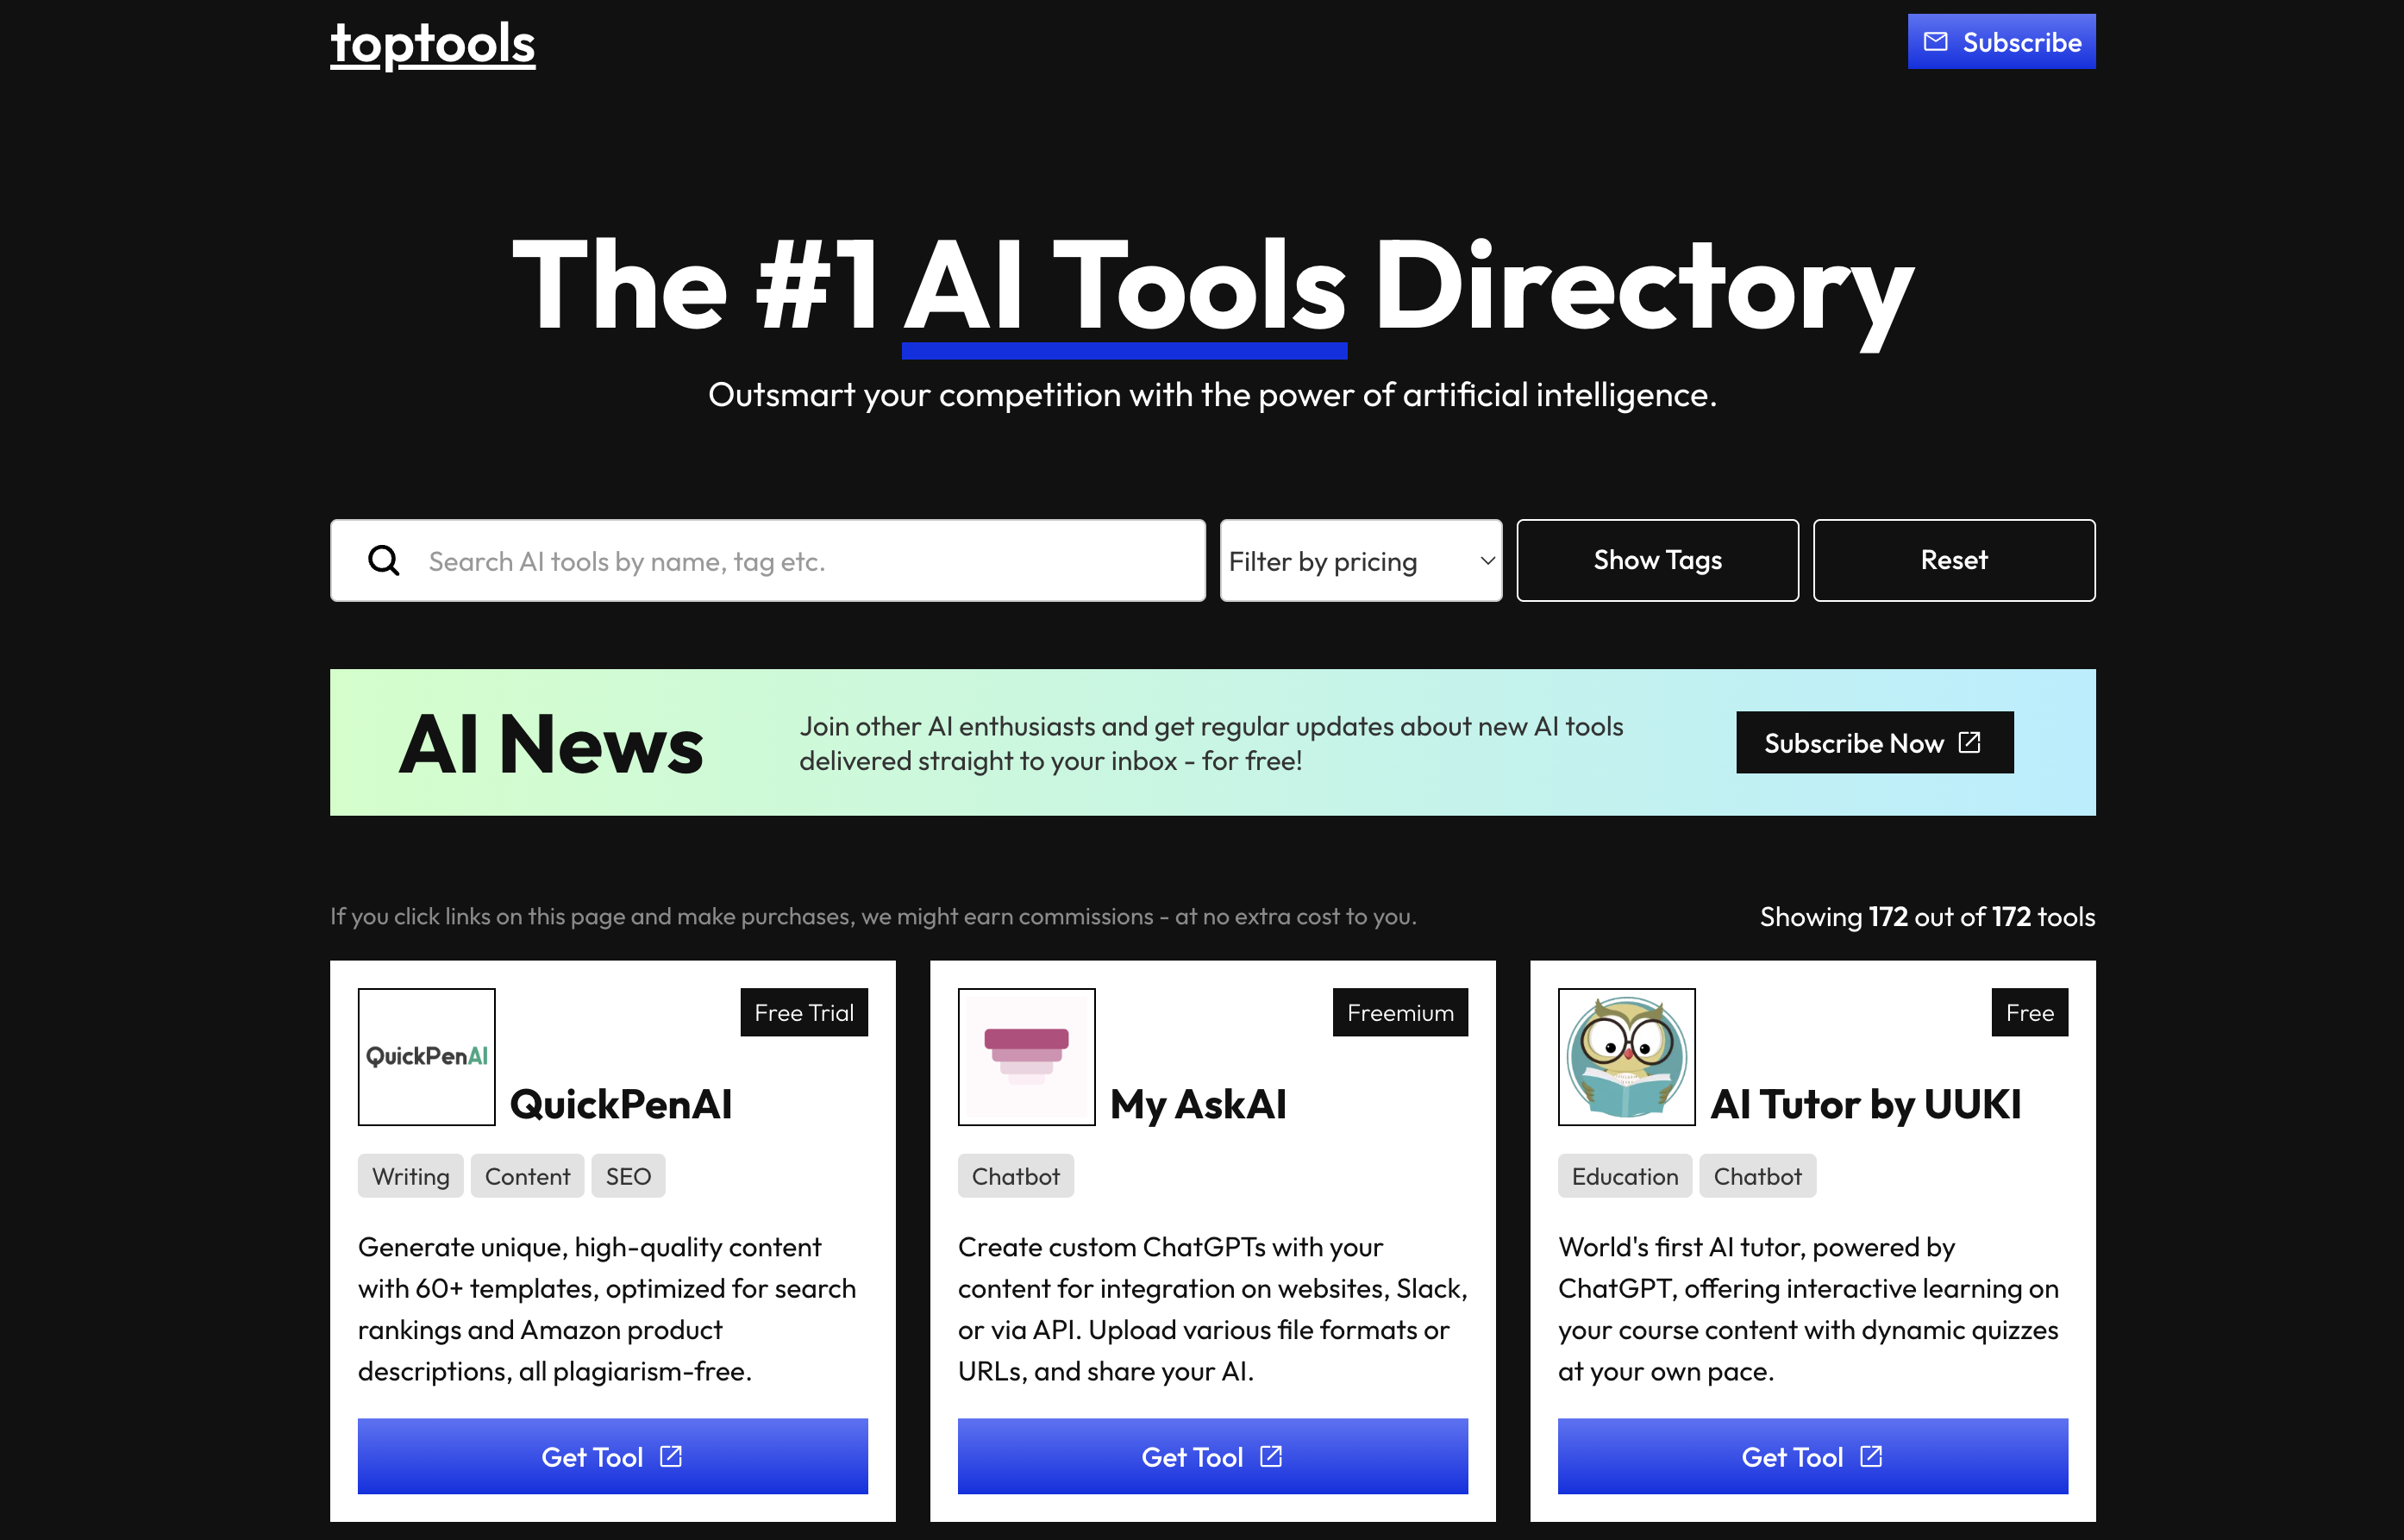 Top Tools is another excellent online AI tools directory that’s really simple to use. It’s a single-page website with dynamic search and display functionality. Jump into the website and browse their seemingly endless list of AI apps, or use the search box to find something specific. You can search by either the name of the app or by entering relevant tags.